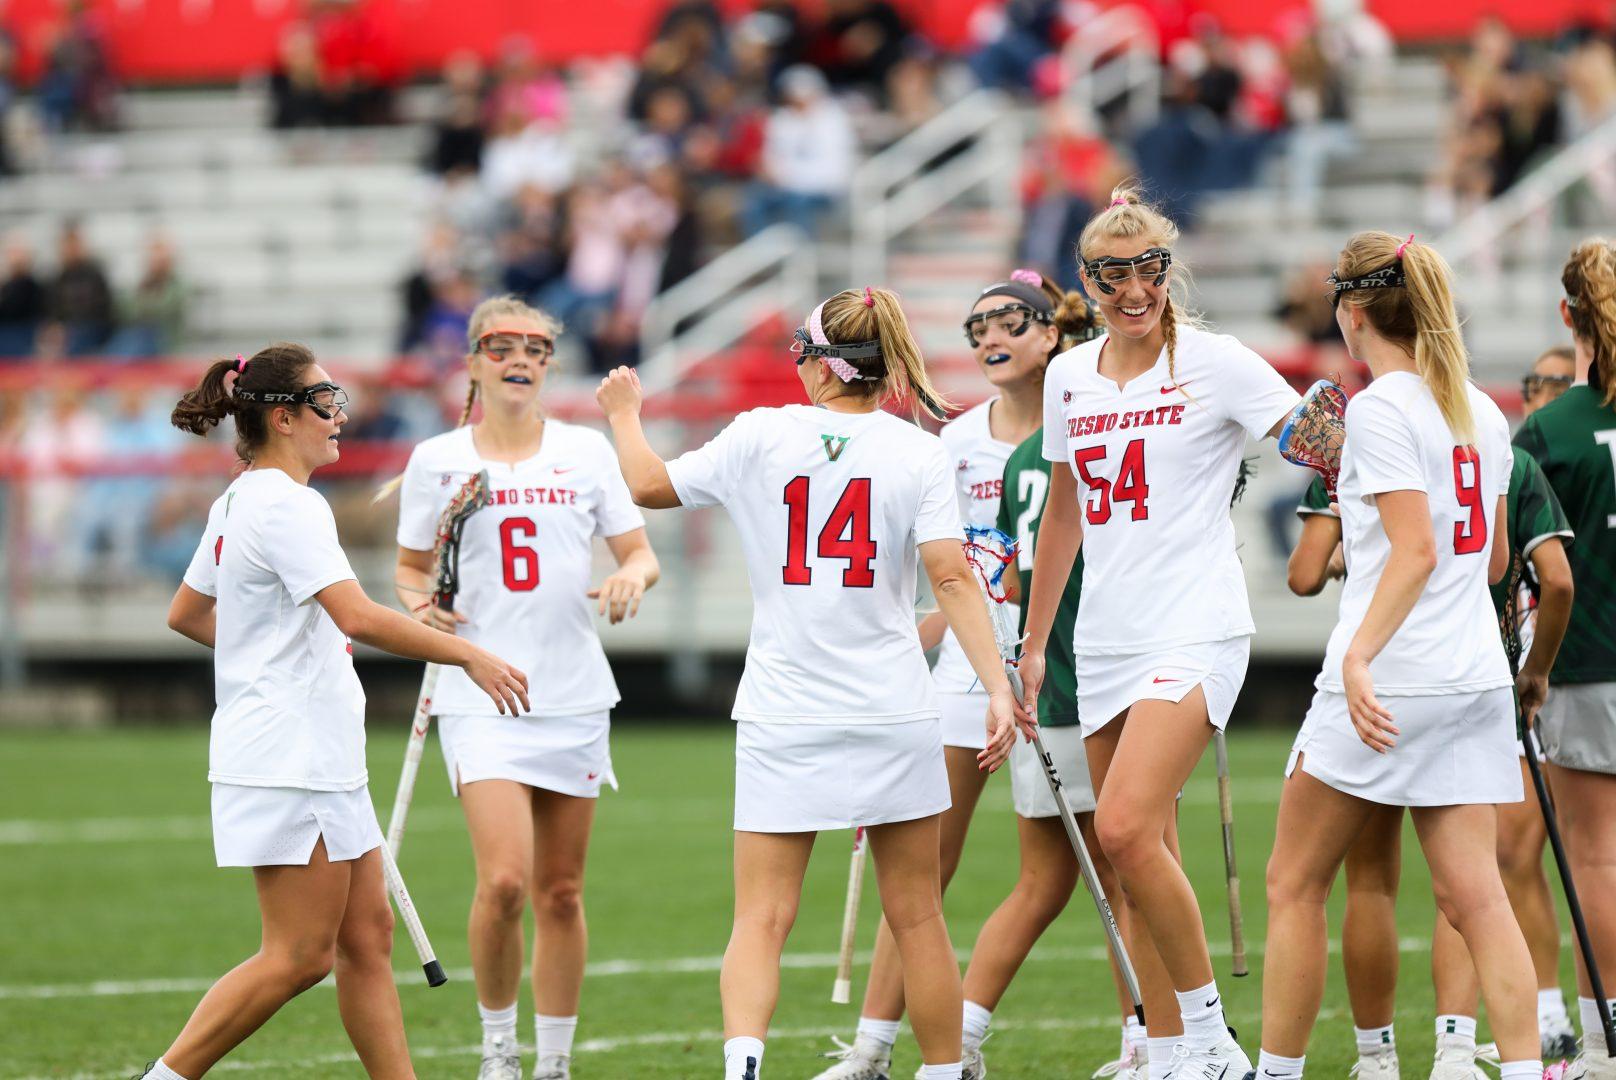 Fresno State’s women’s lacrosse team celebrates a goal made during the first half of the Bulldog’s 21-13 victory over Stetson at Fresno State Soccer & Lacrosse Stadium on Feb. 22, 2020. (Vendila Yang/The Collegian)